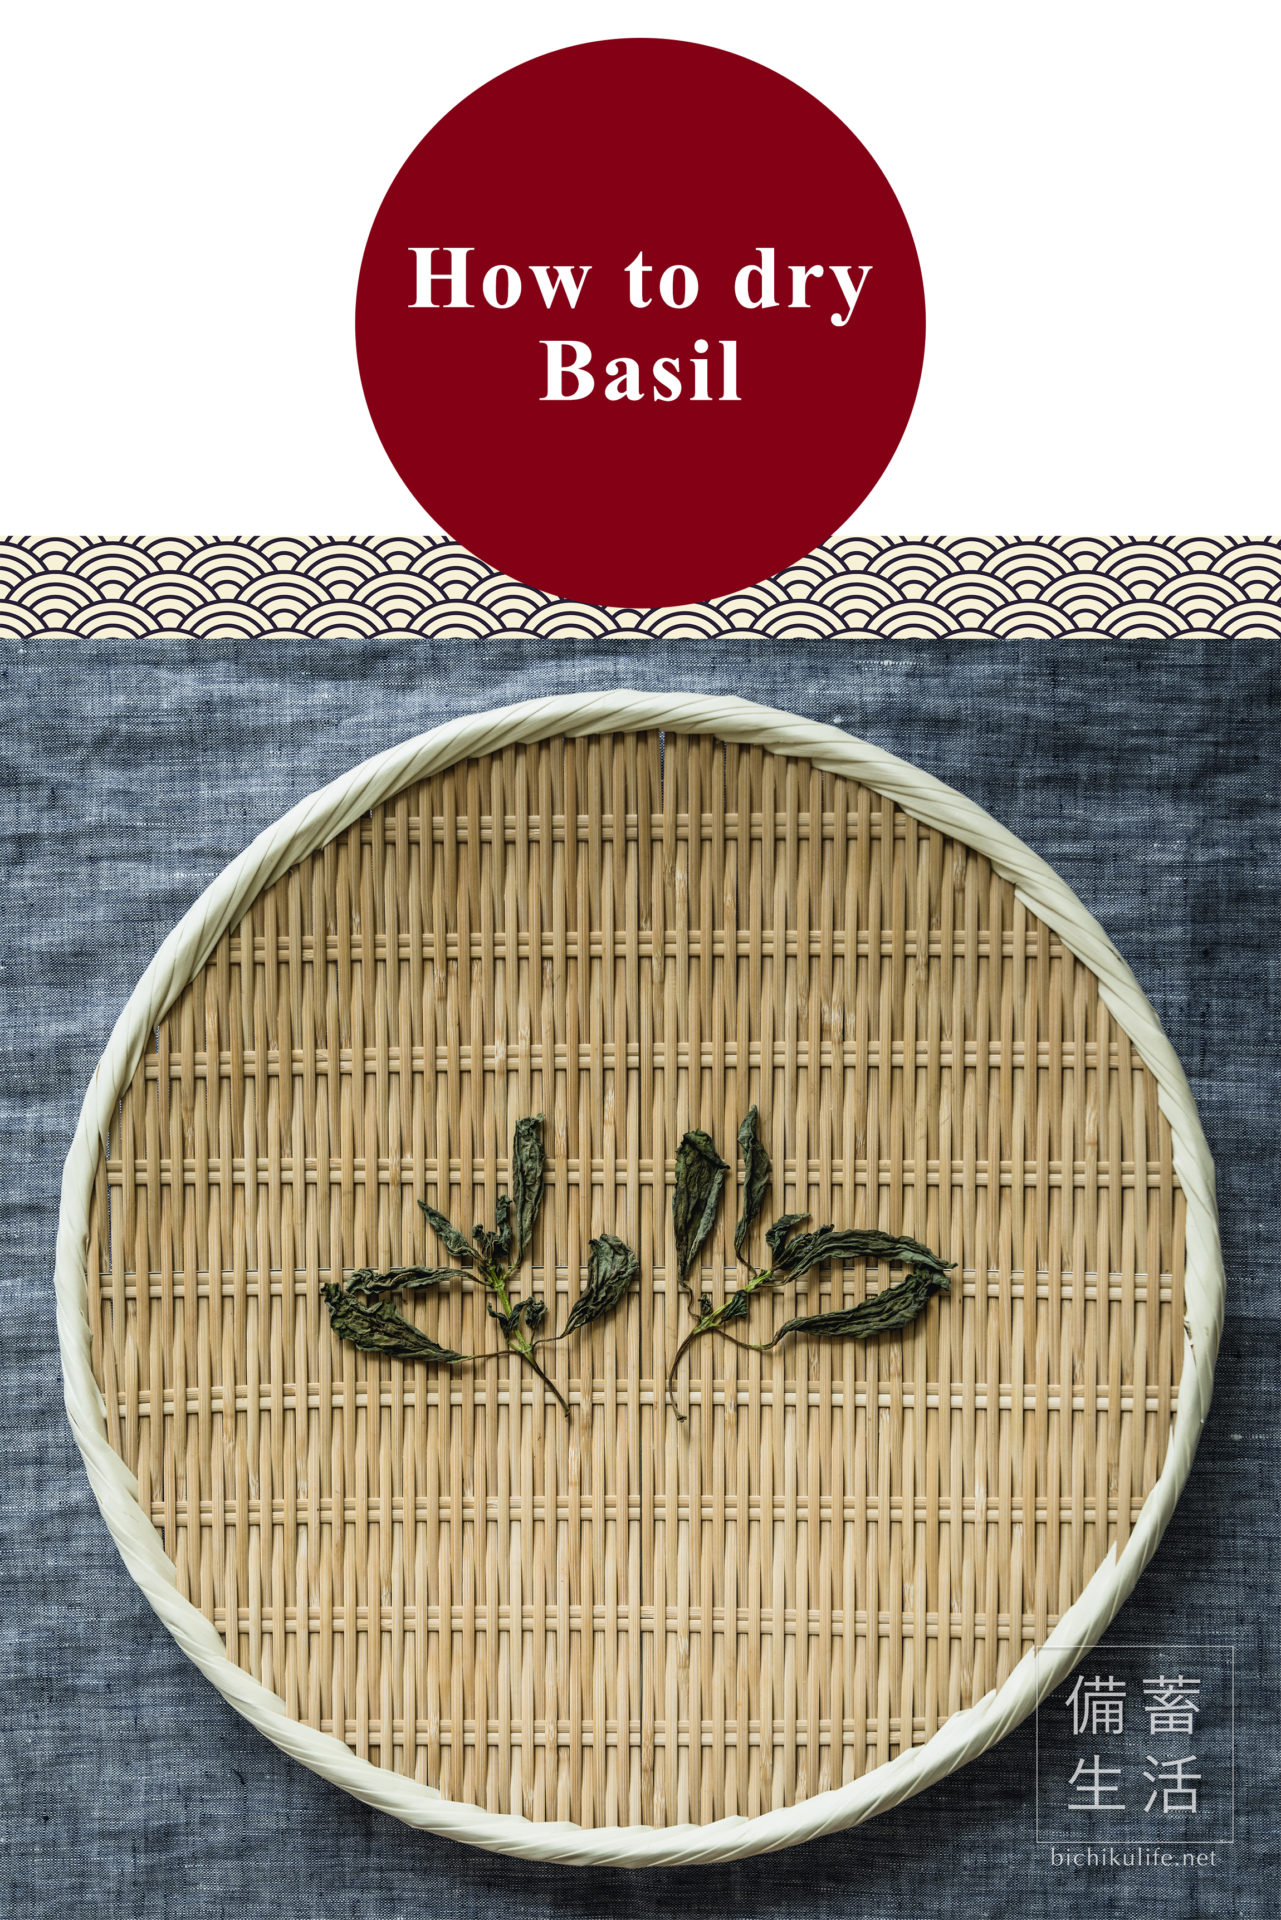 How to dry Basil